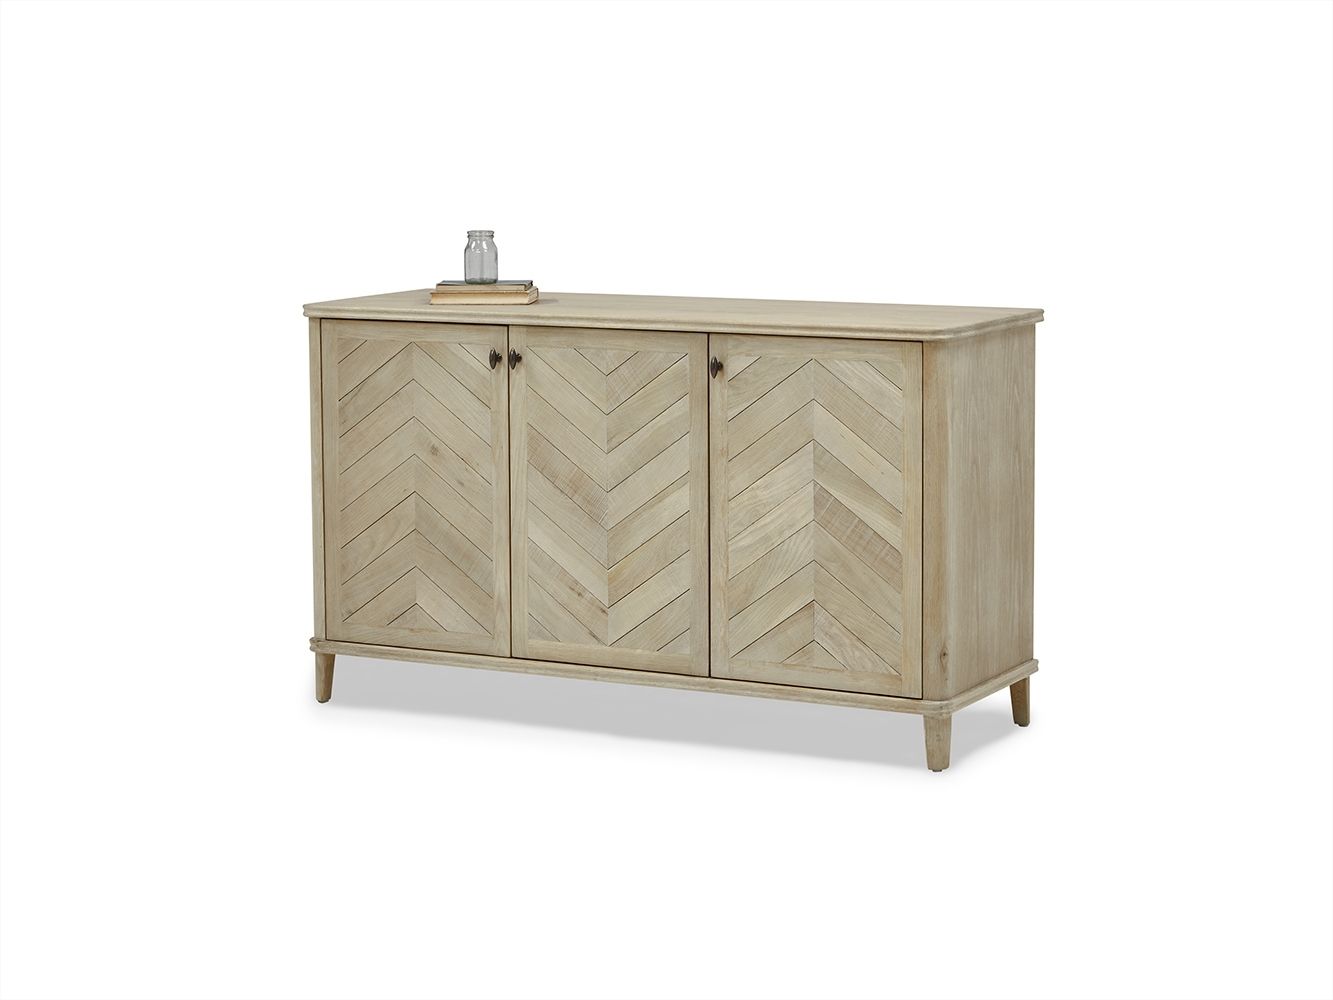 Grand Fandangle Sideboard | Parquet Wood Sideboard | Loaf In Parquet Sideboards (View 2 of 30)